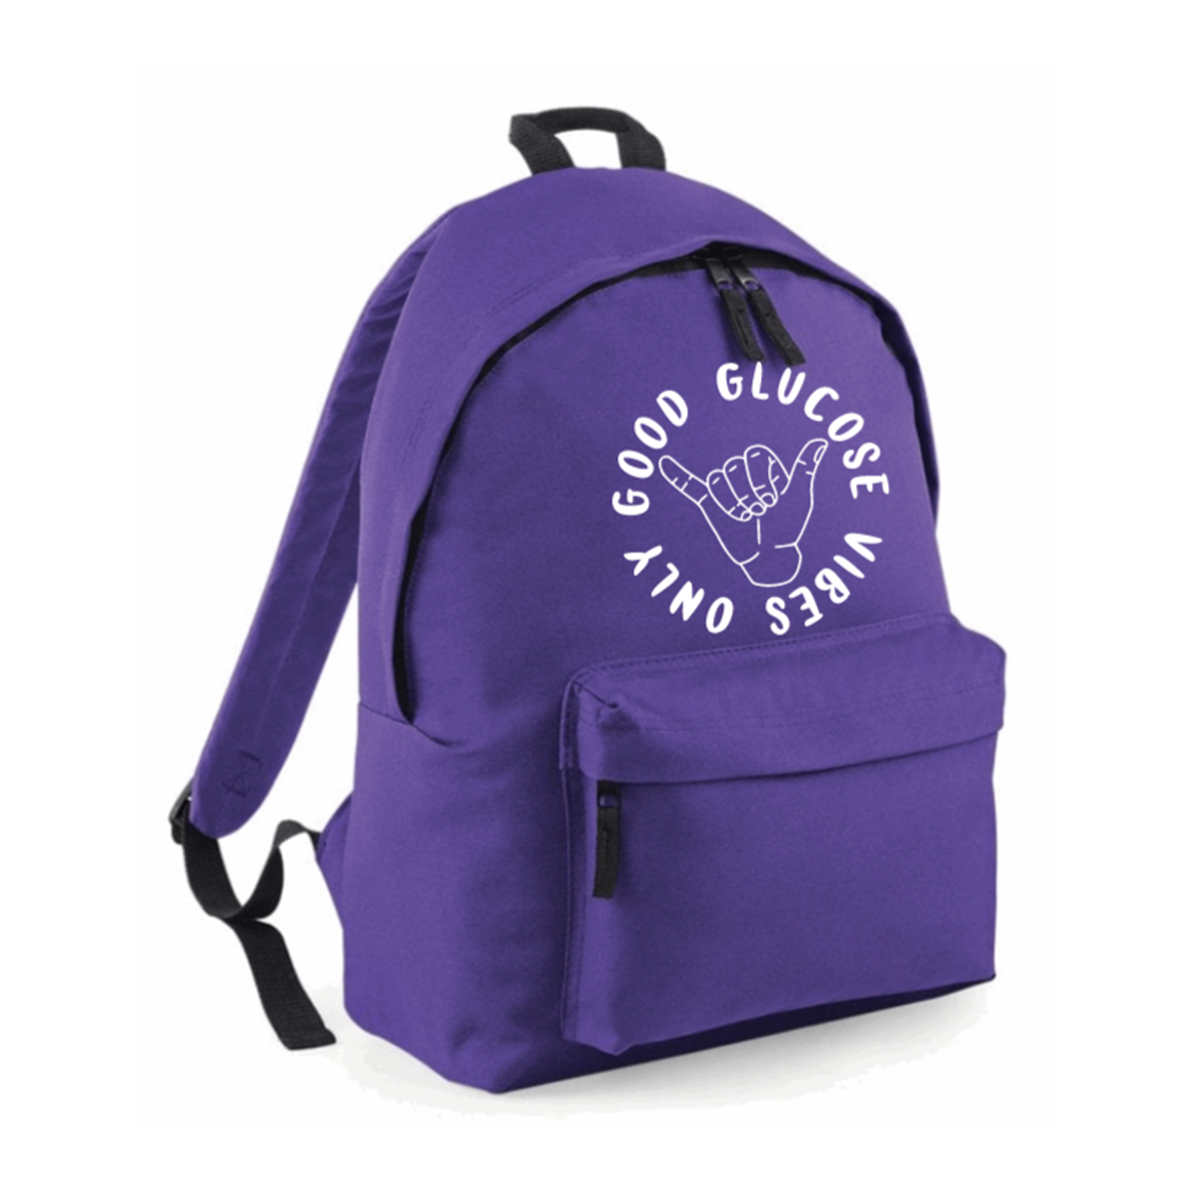 Good Glucose Vibes Only Backpack